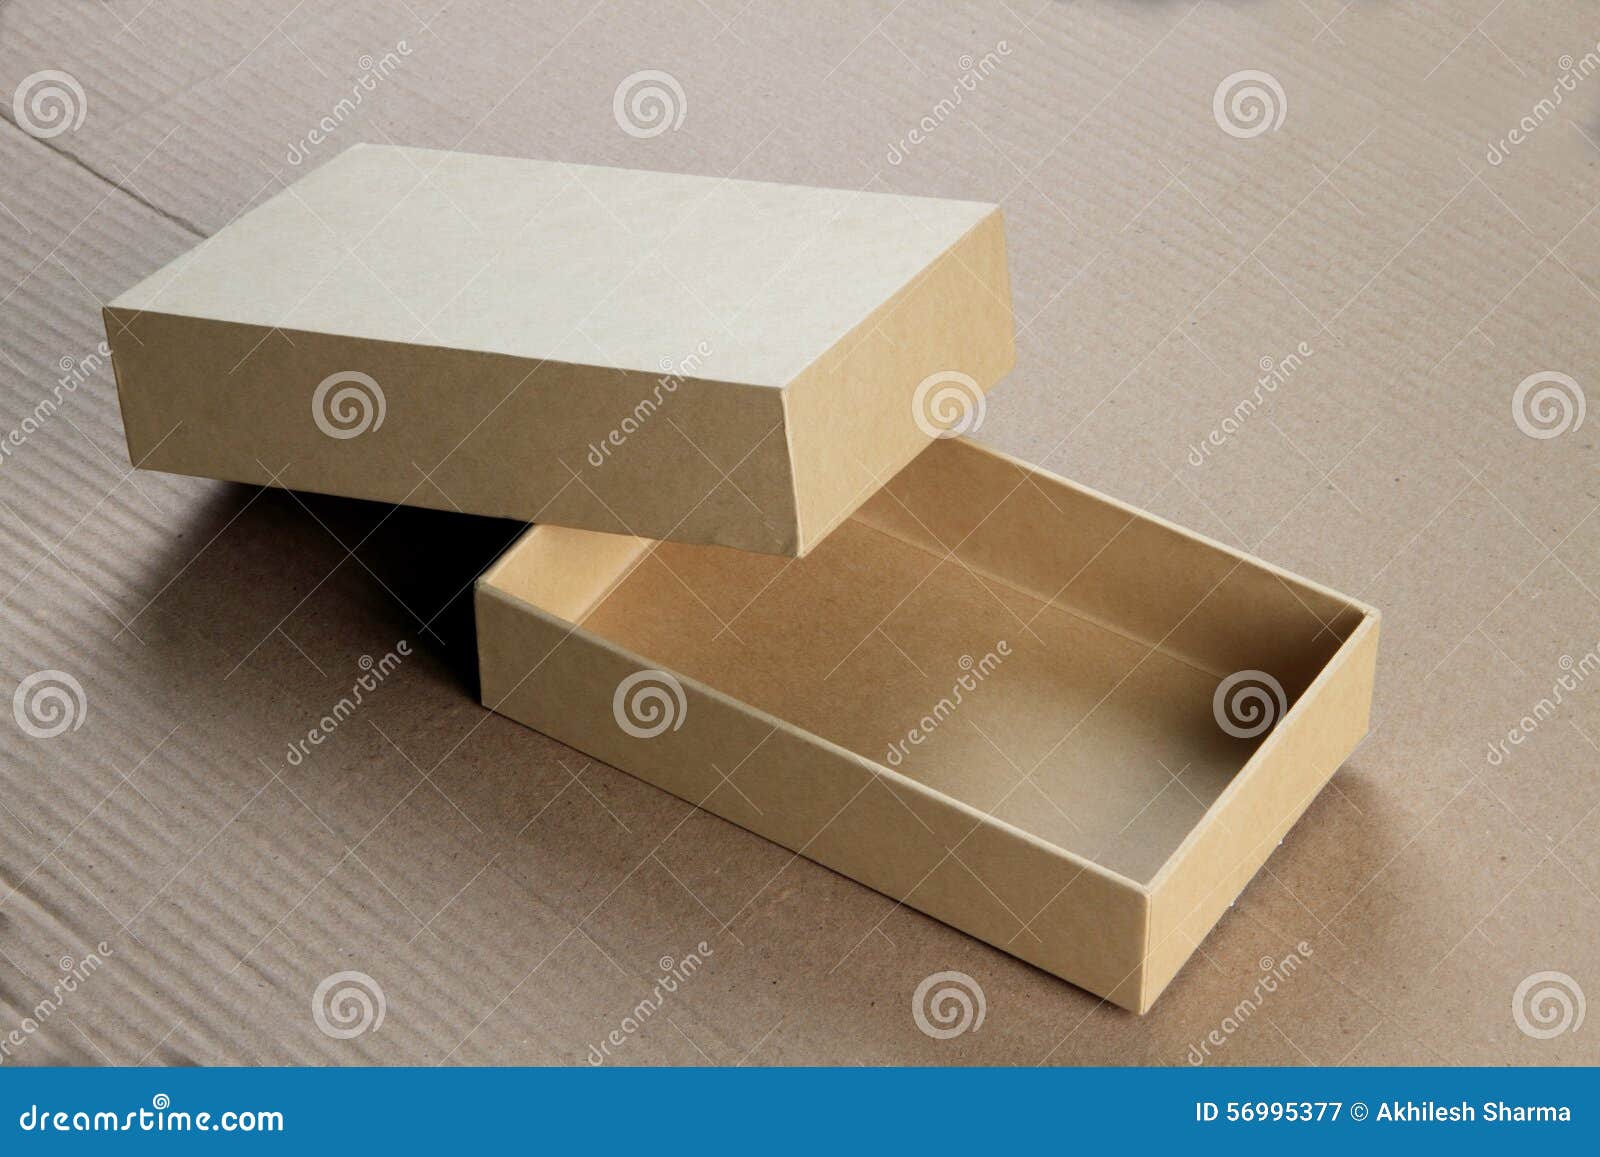 Download Blank Card Board Box For Mockup Stock Image - Image of ...